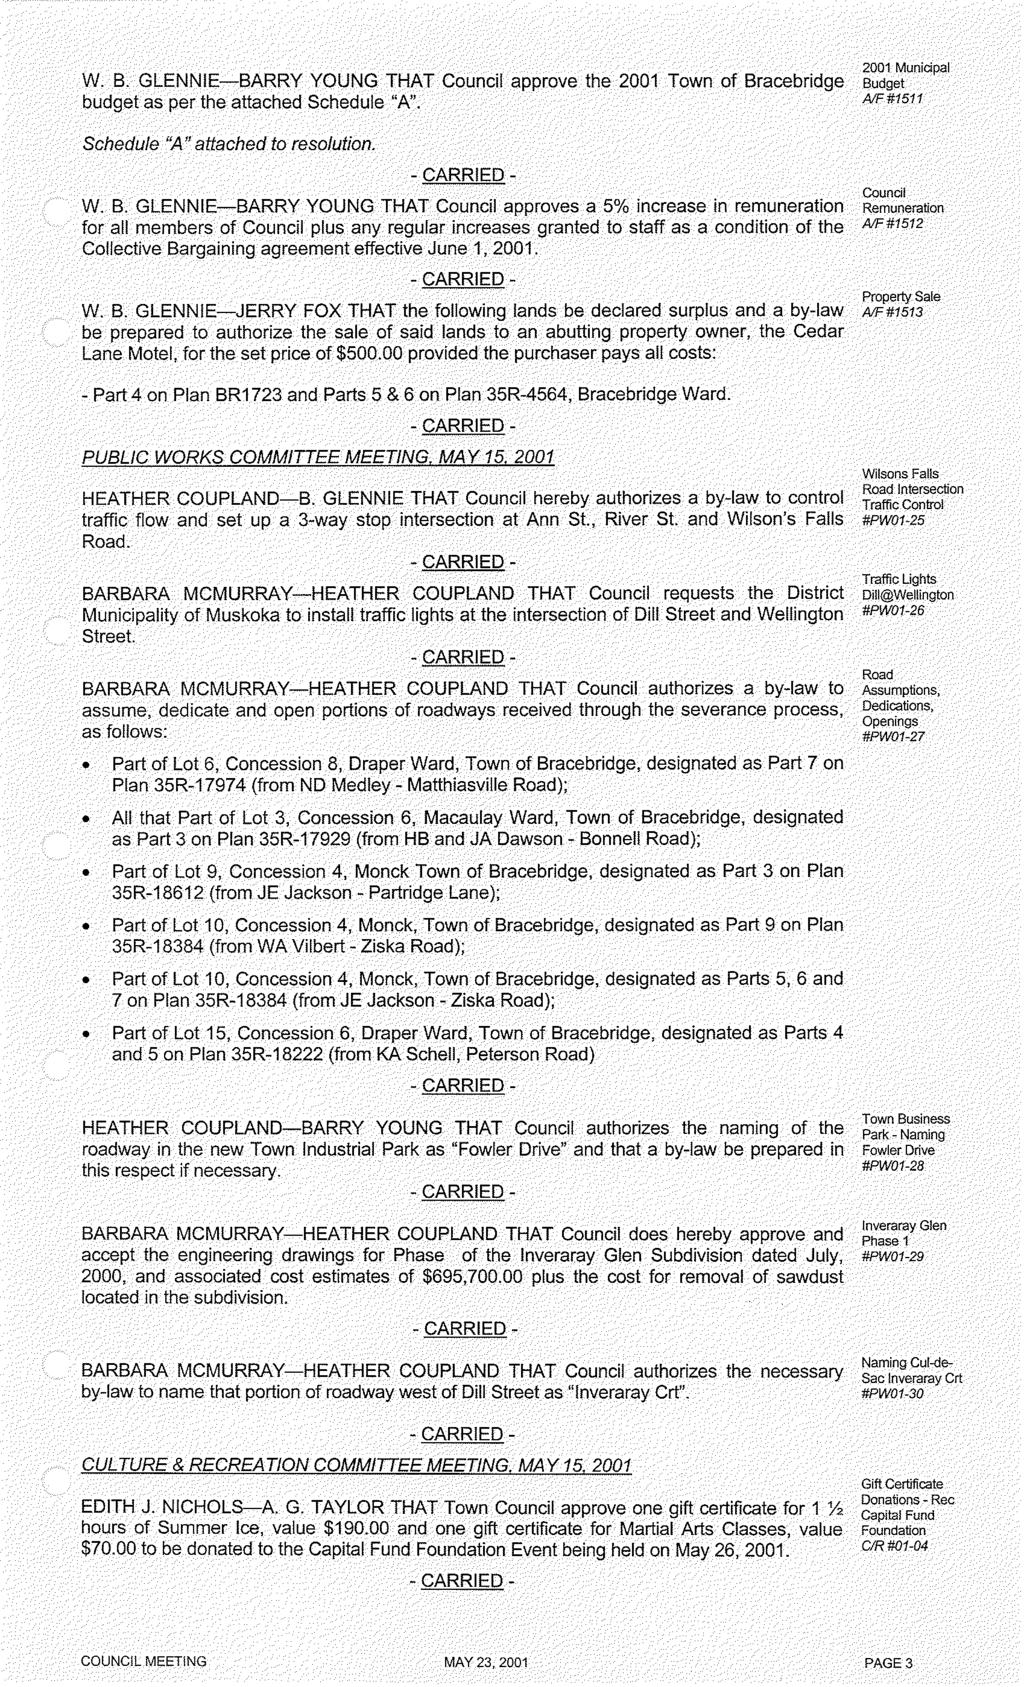 W. B. GLENNIE-BARRY YOUNG THAT Council approve the 2001 Town of Bracebridge budget as per the attached Schedule "A". Schedule '\4" attached to resolution. W. B. GLENNIE-BARRY YOUNG THAT Council